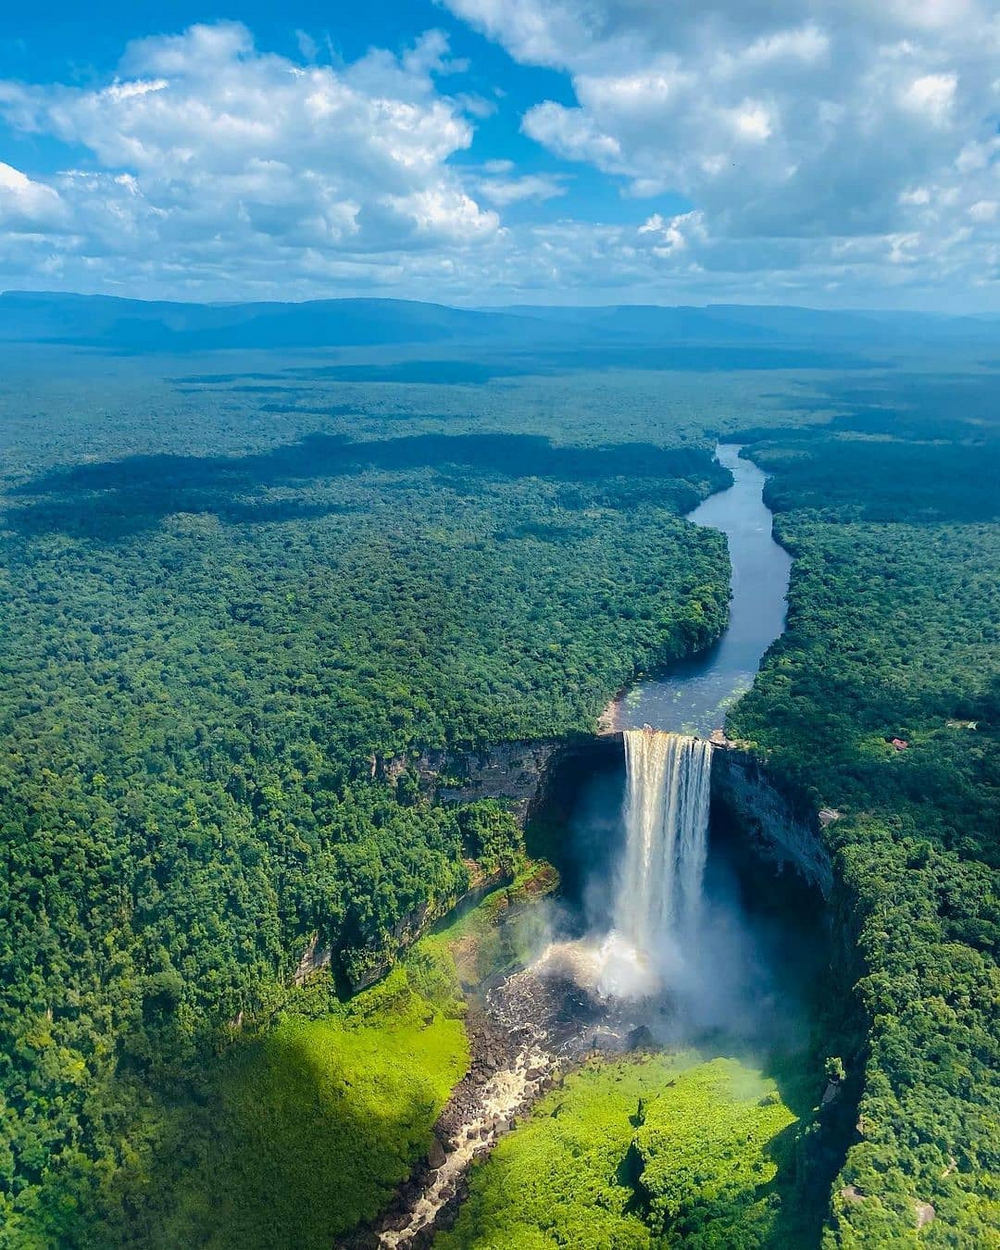 View of Kaieteur Falls from the scenic flight in Guyana